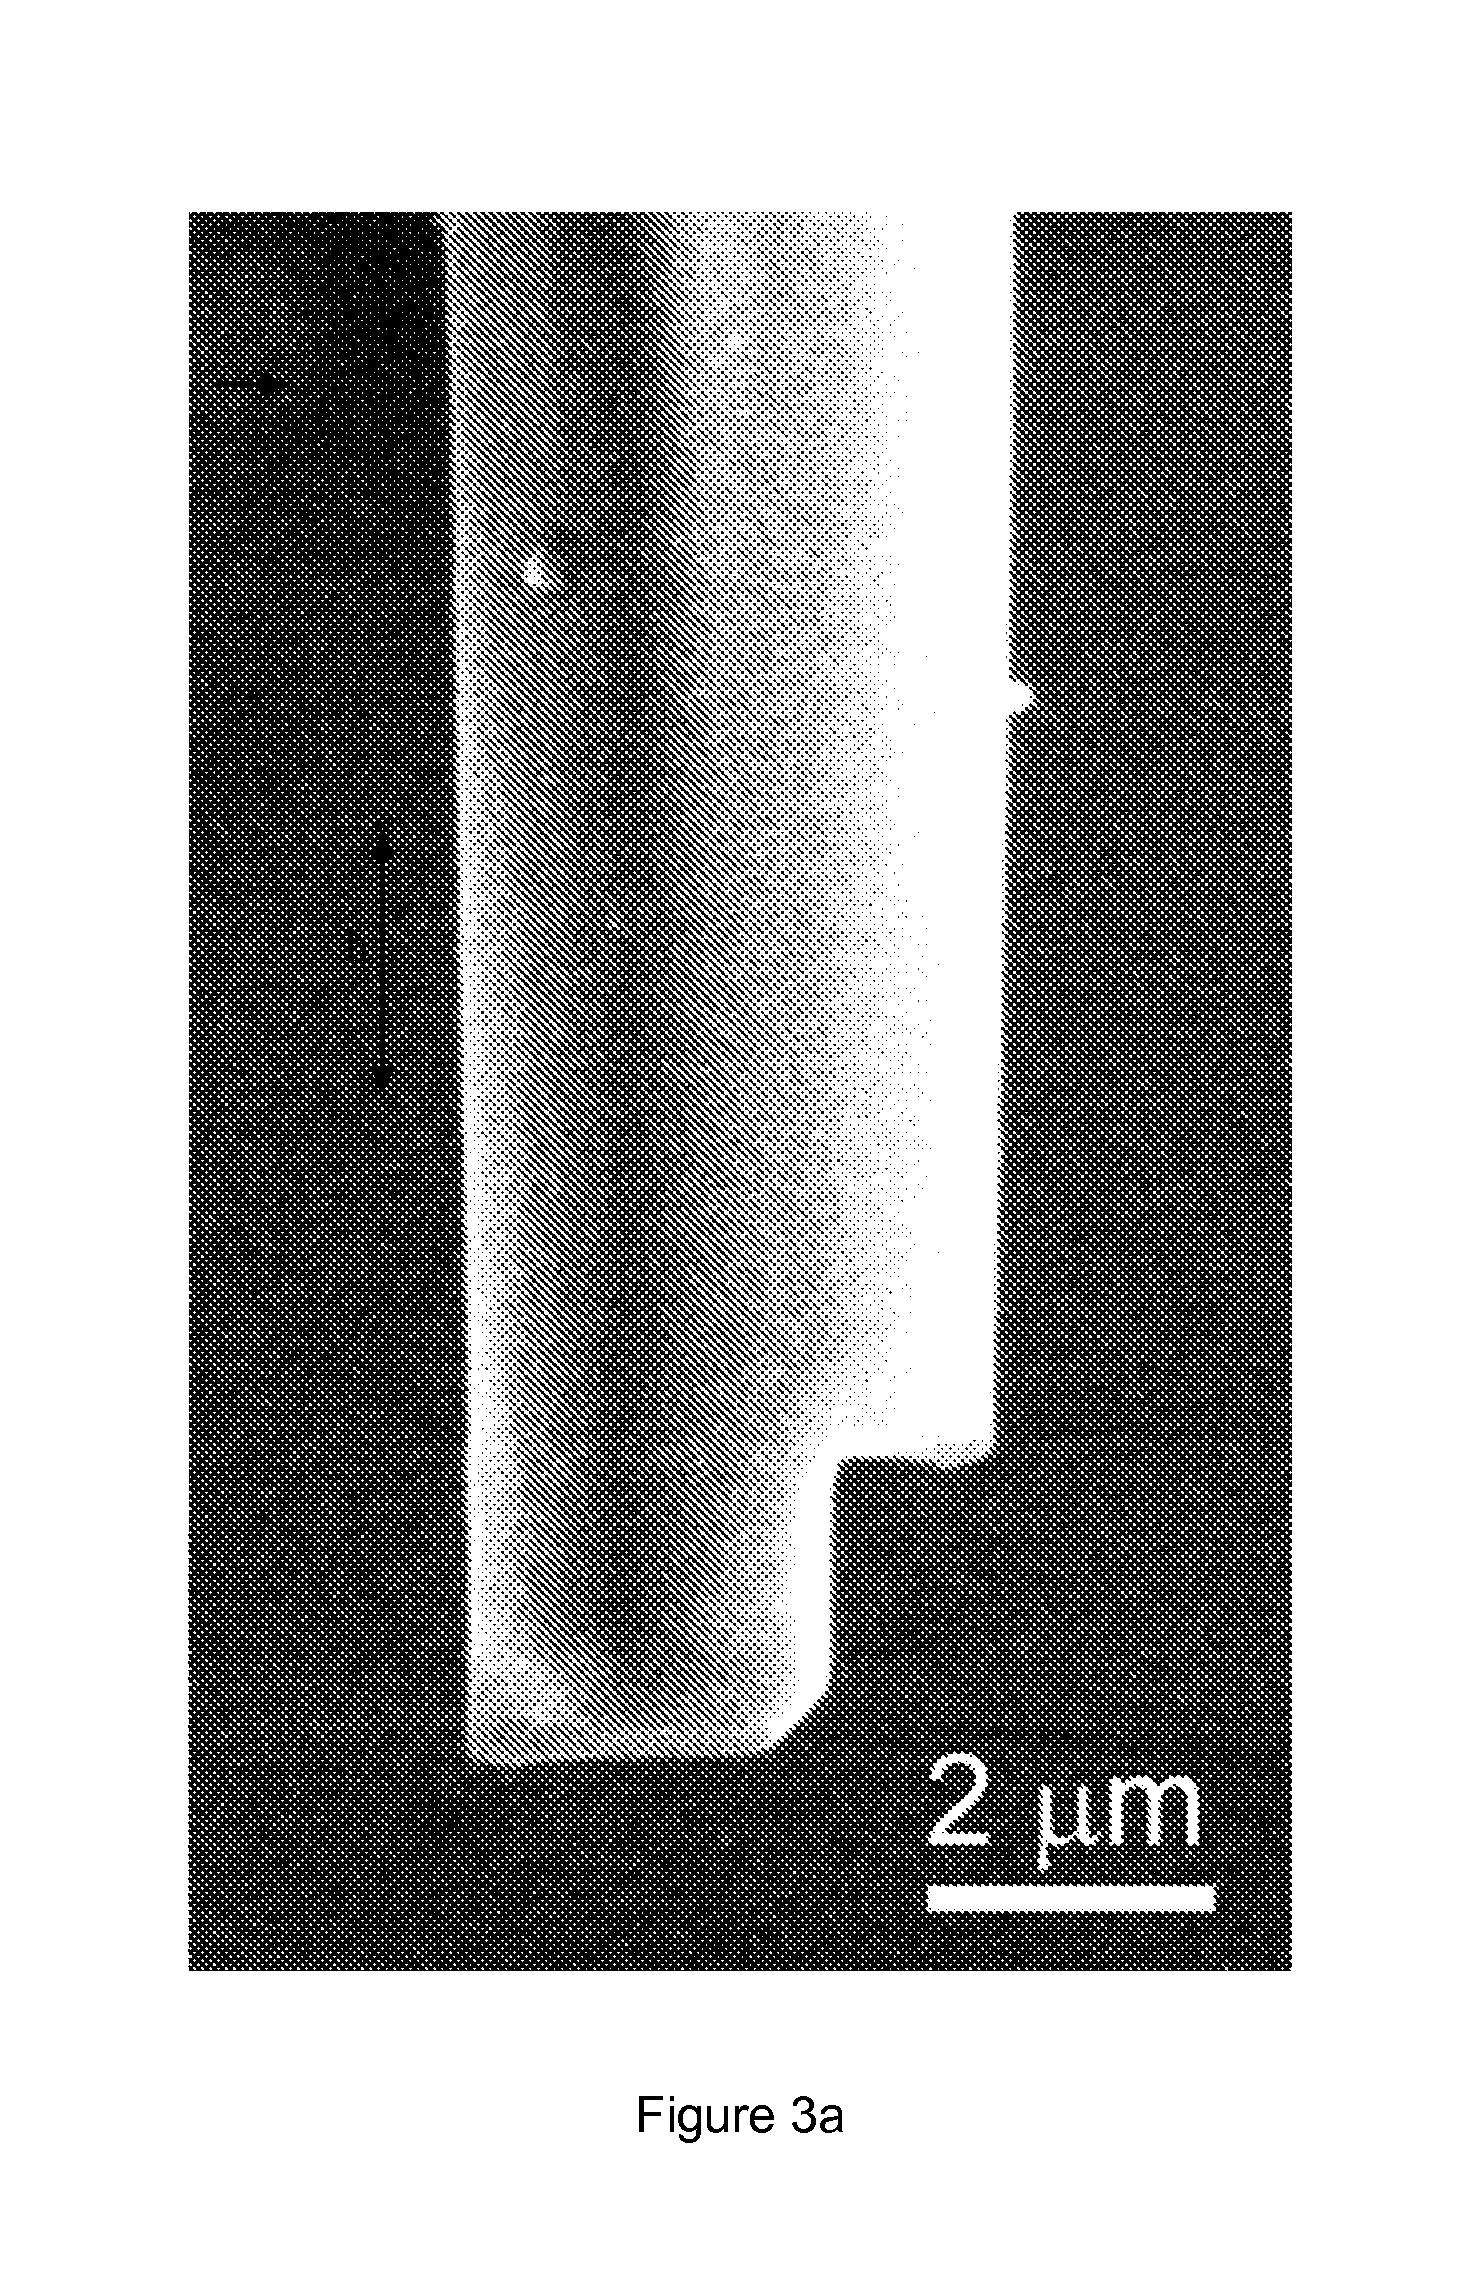 Electrochemical methods for wire bonding